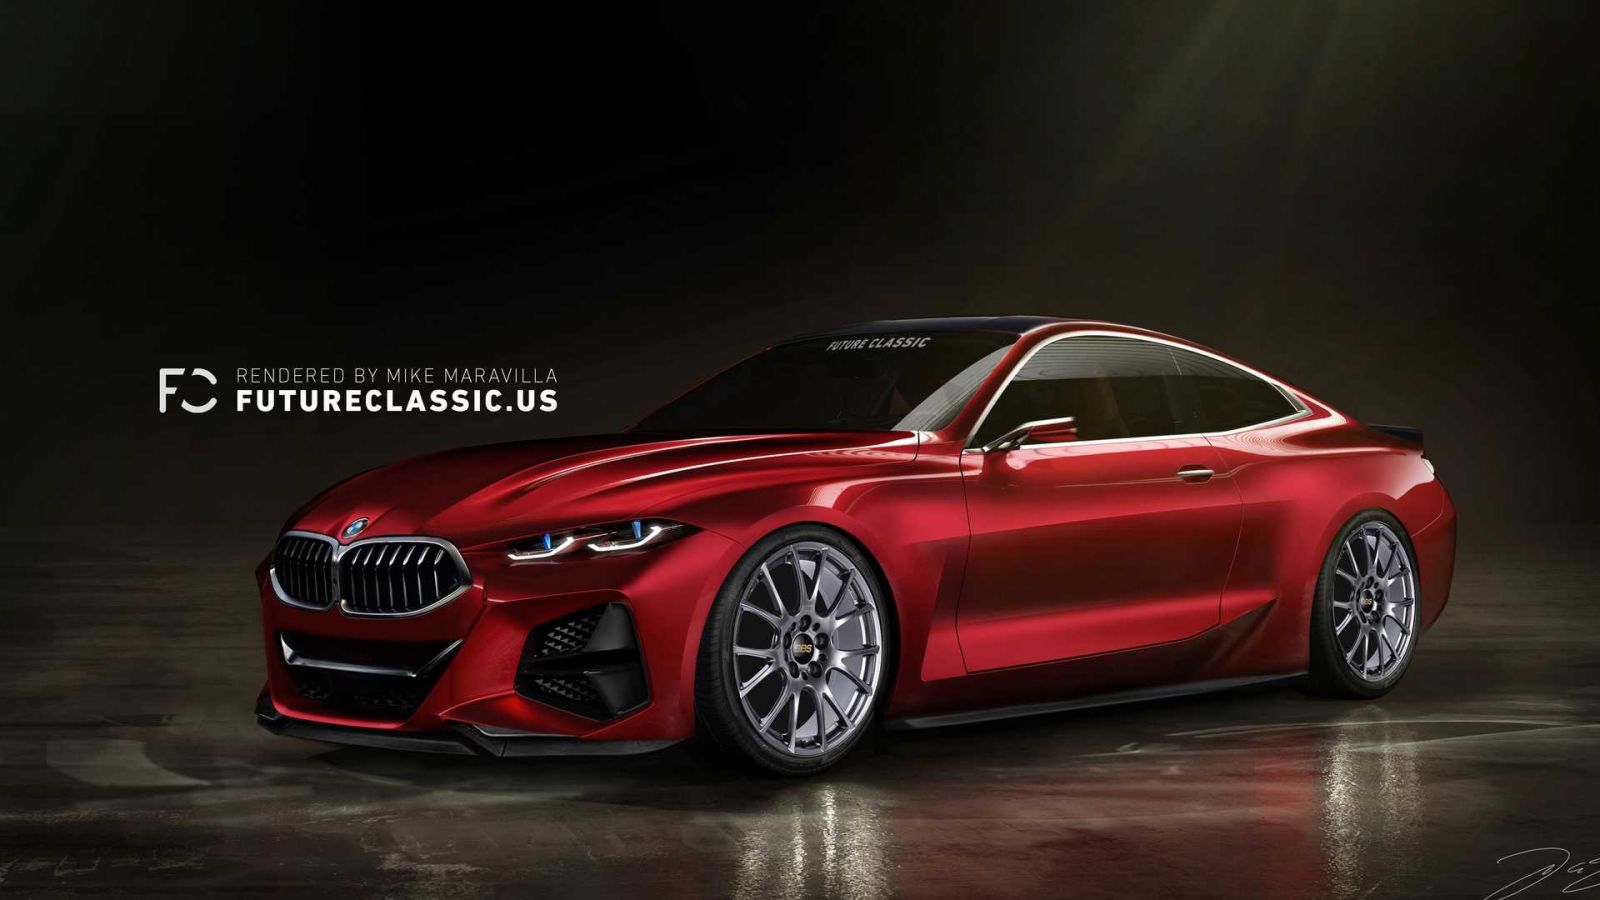 Illustration for article titled This is what the 4 series should look like